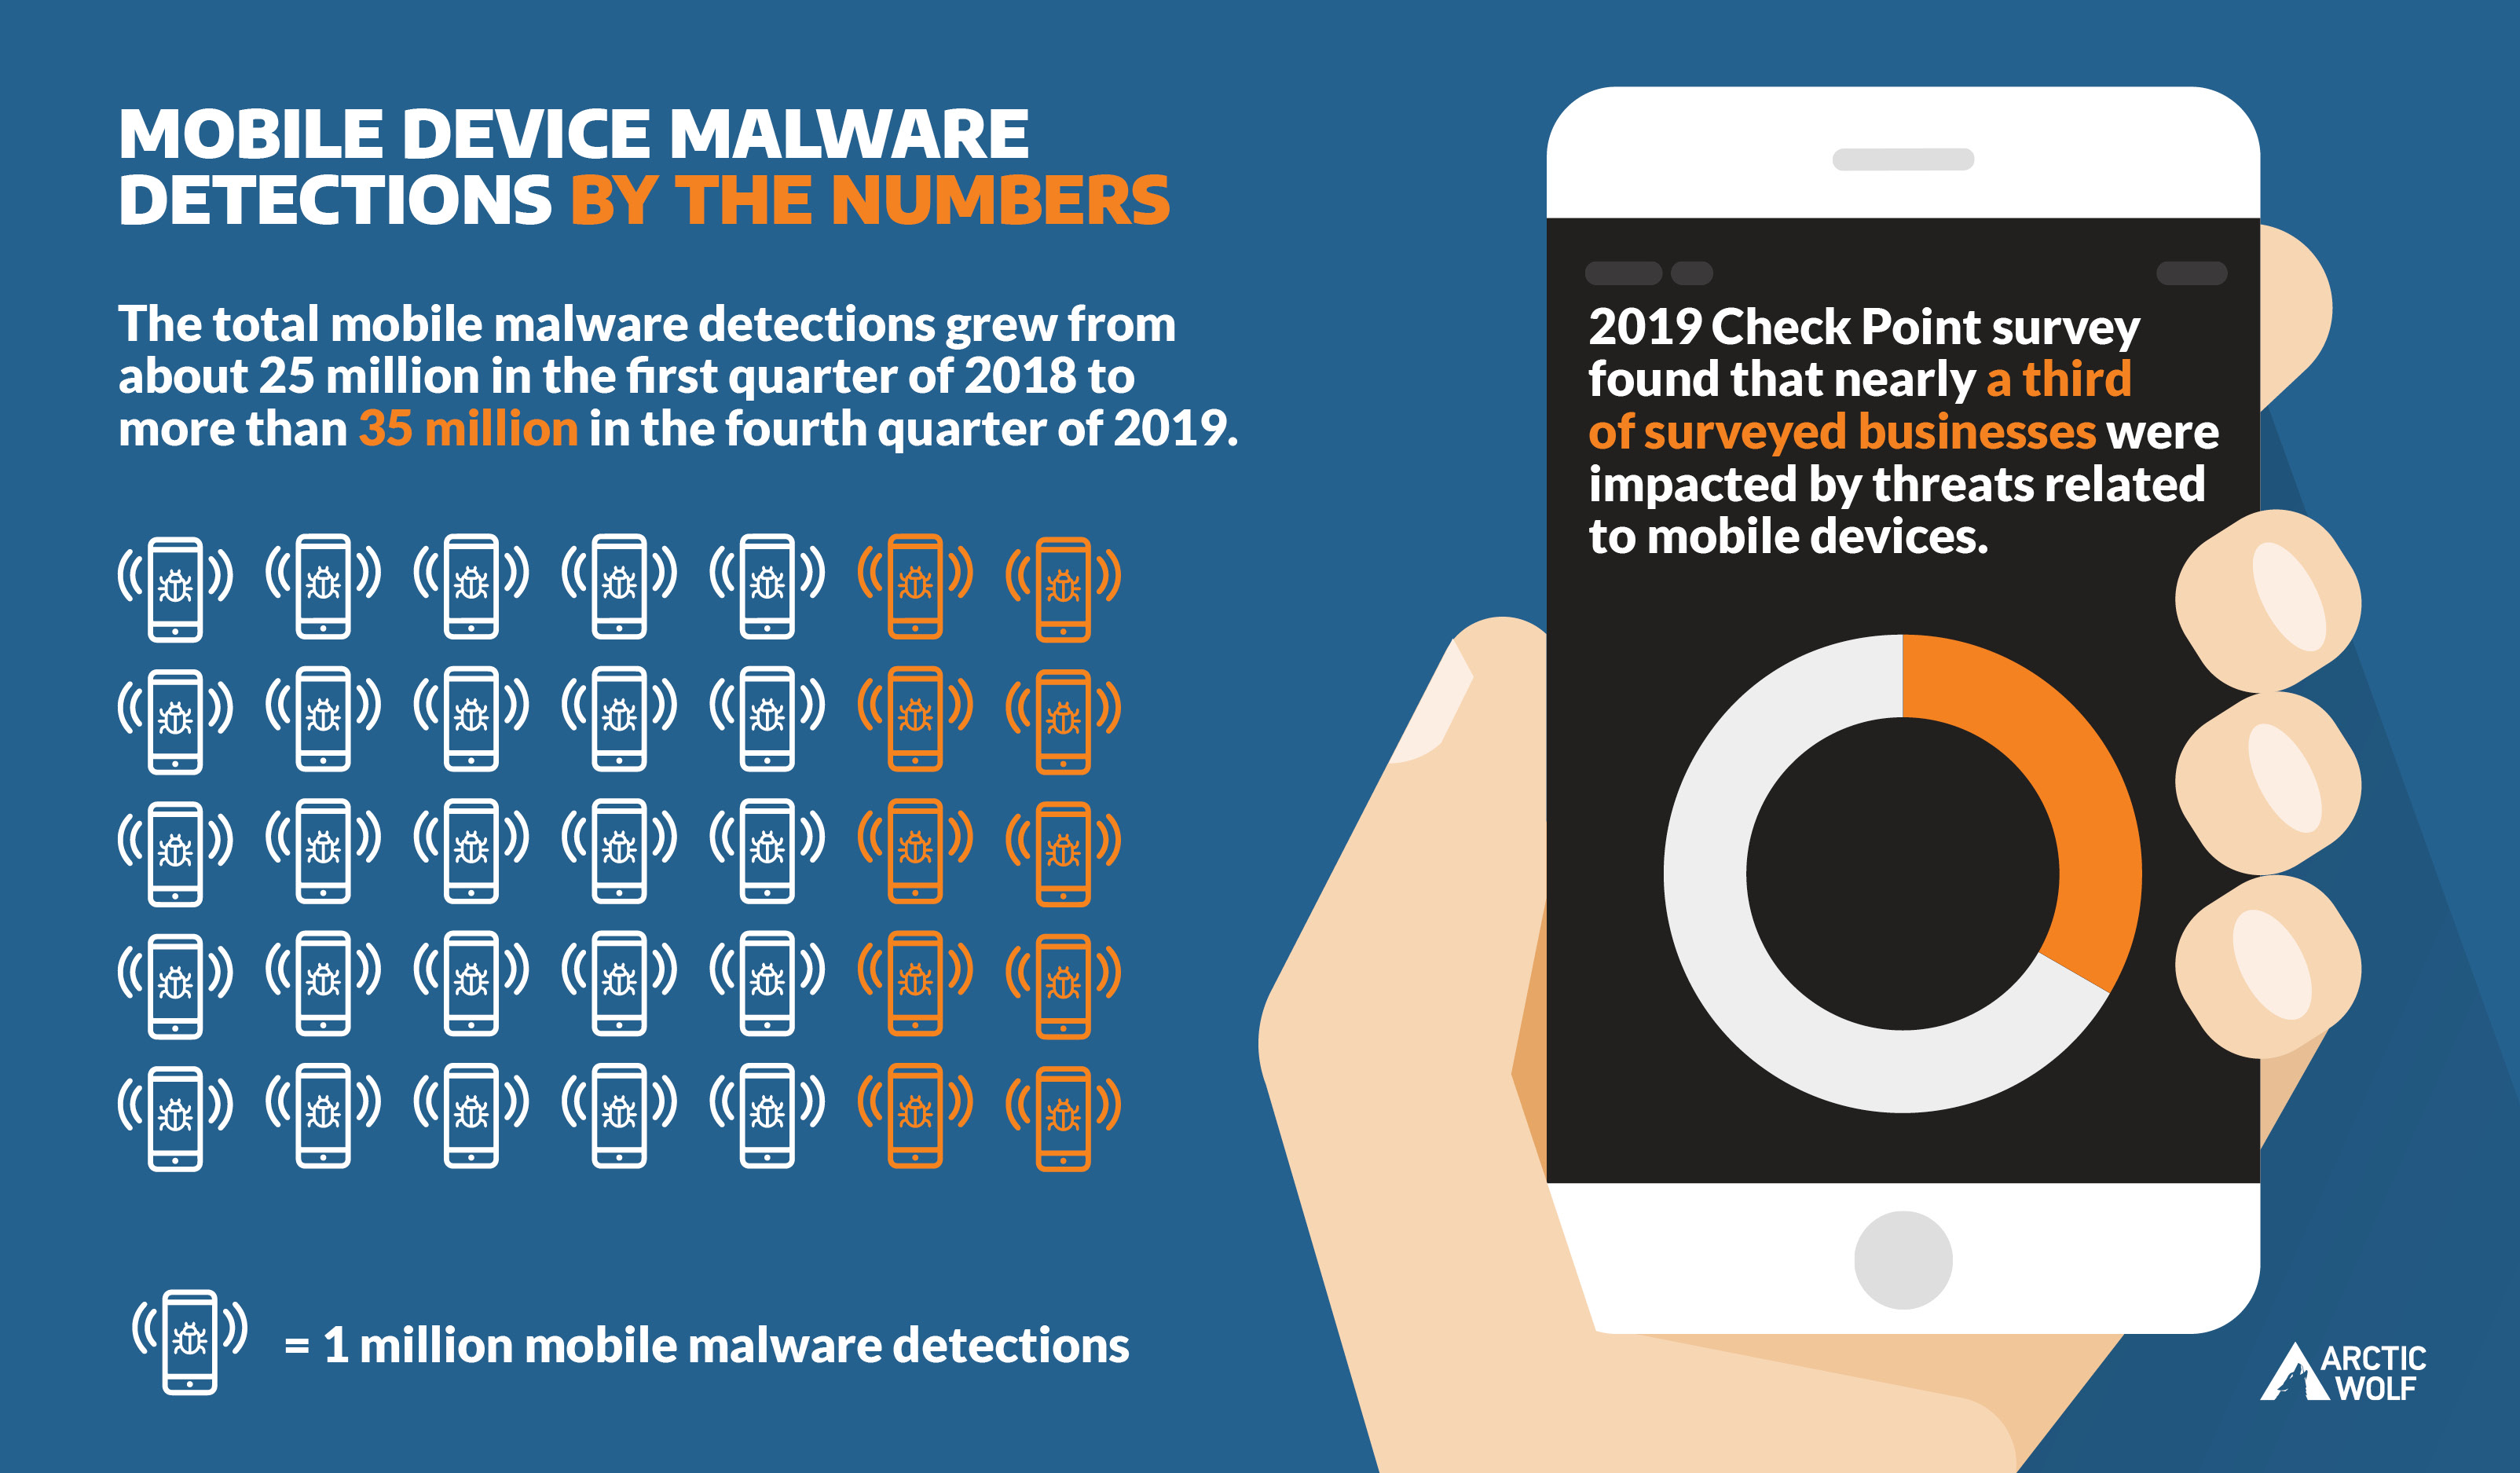 Graphic of Mobile Device malware detections by the numbers. Detections grew from 25 million in 2018 to 35 million at end of 2019. 